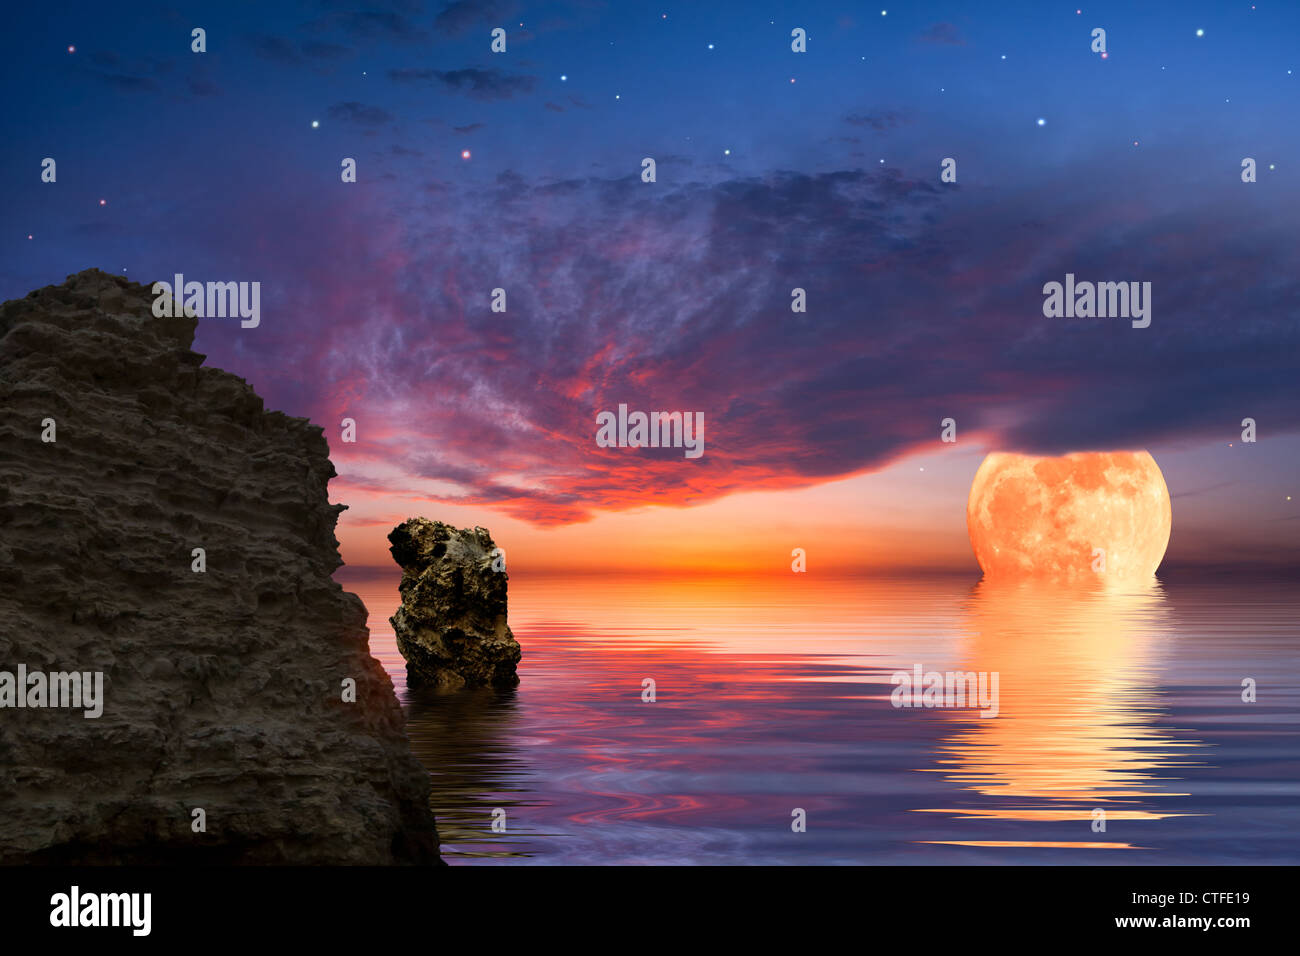 Colorful landscape with big moon and rock at the ocean, sky reflected in water Stock Photo